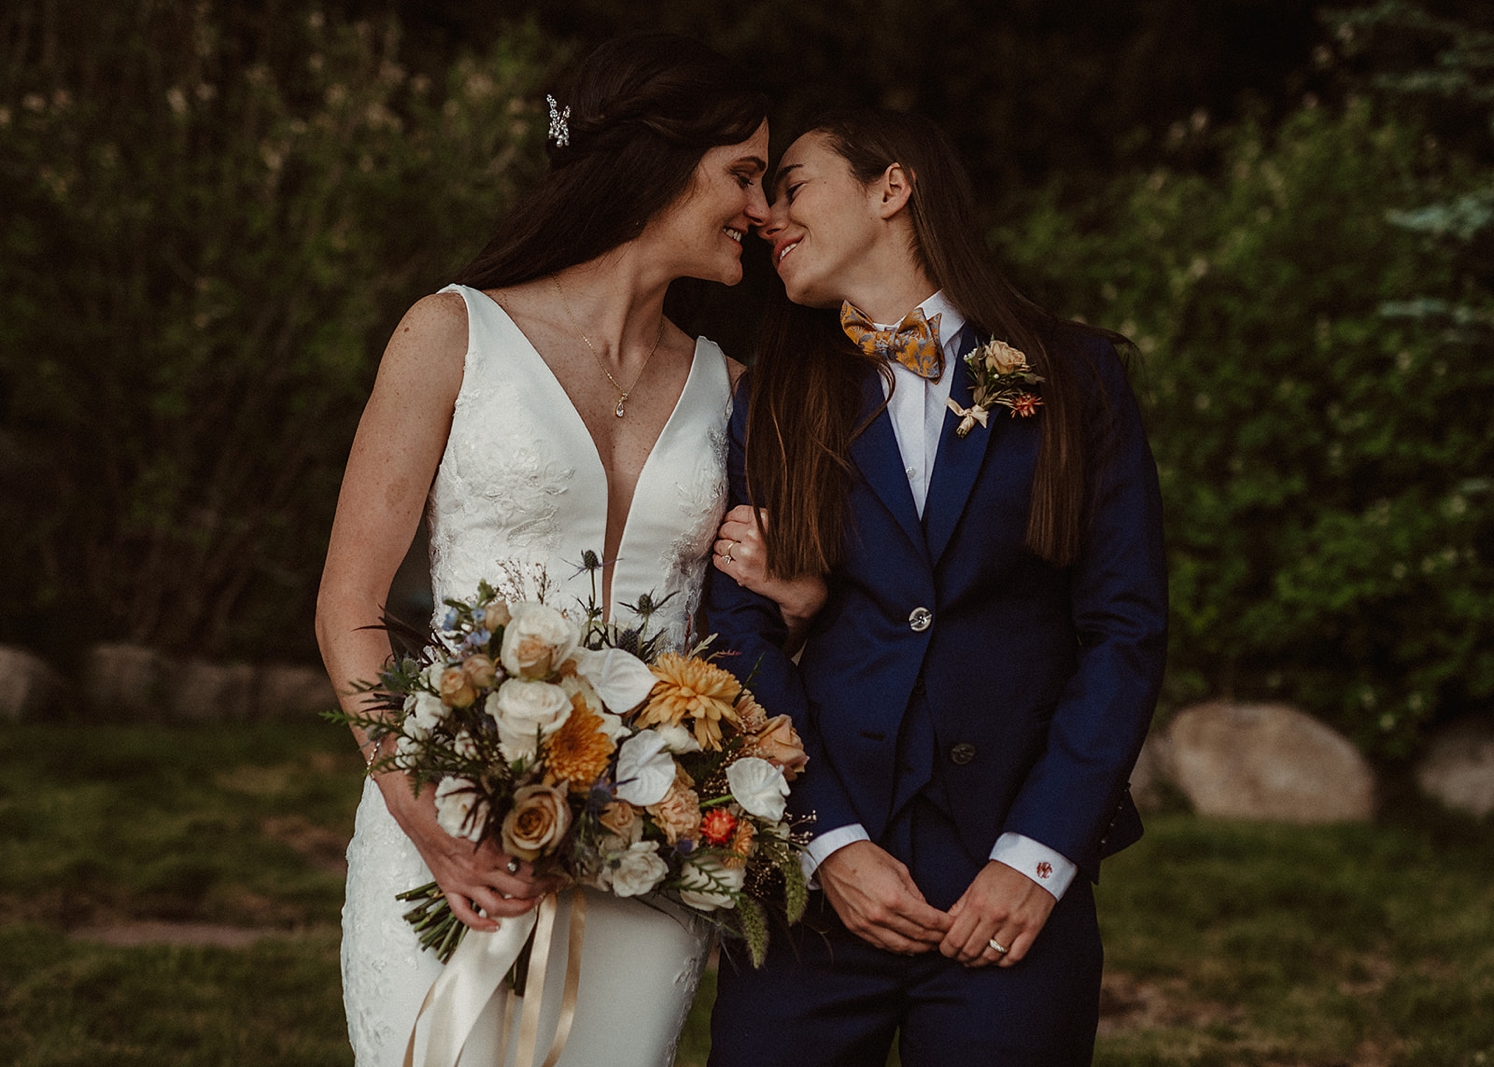 Couple looking at each other and smiling while partner holds bouquet | McArthur Weddings and Events